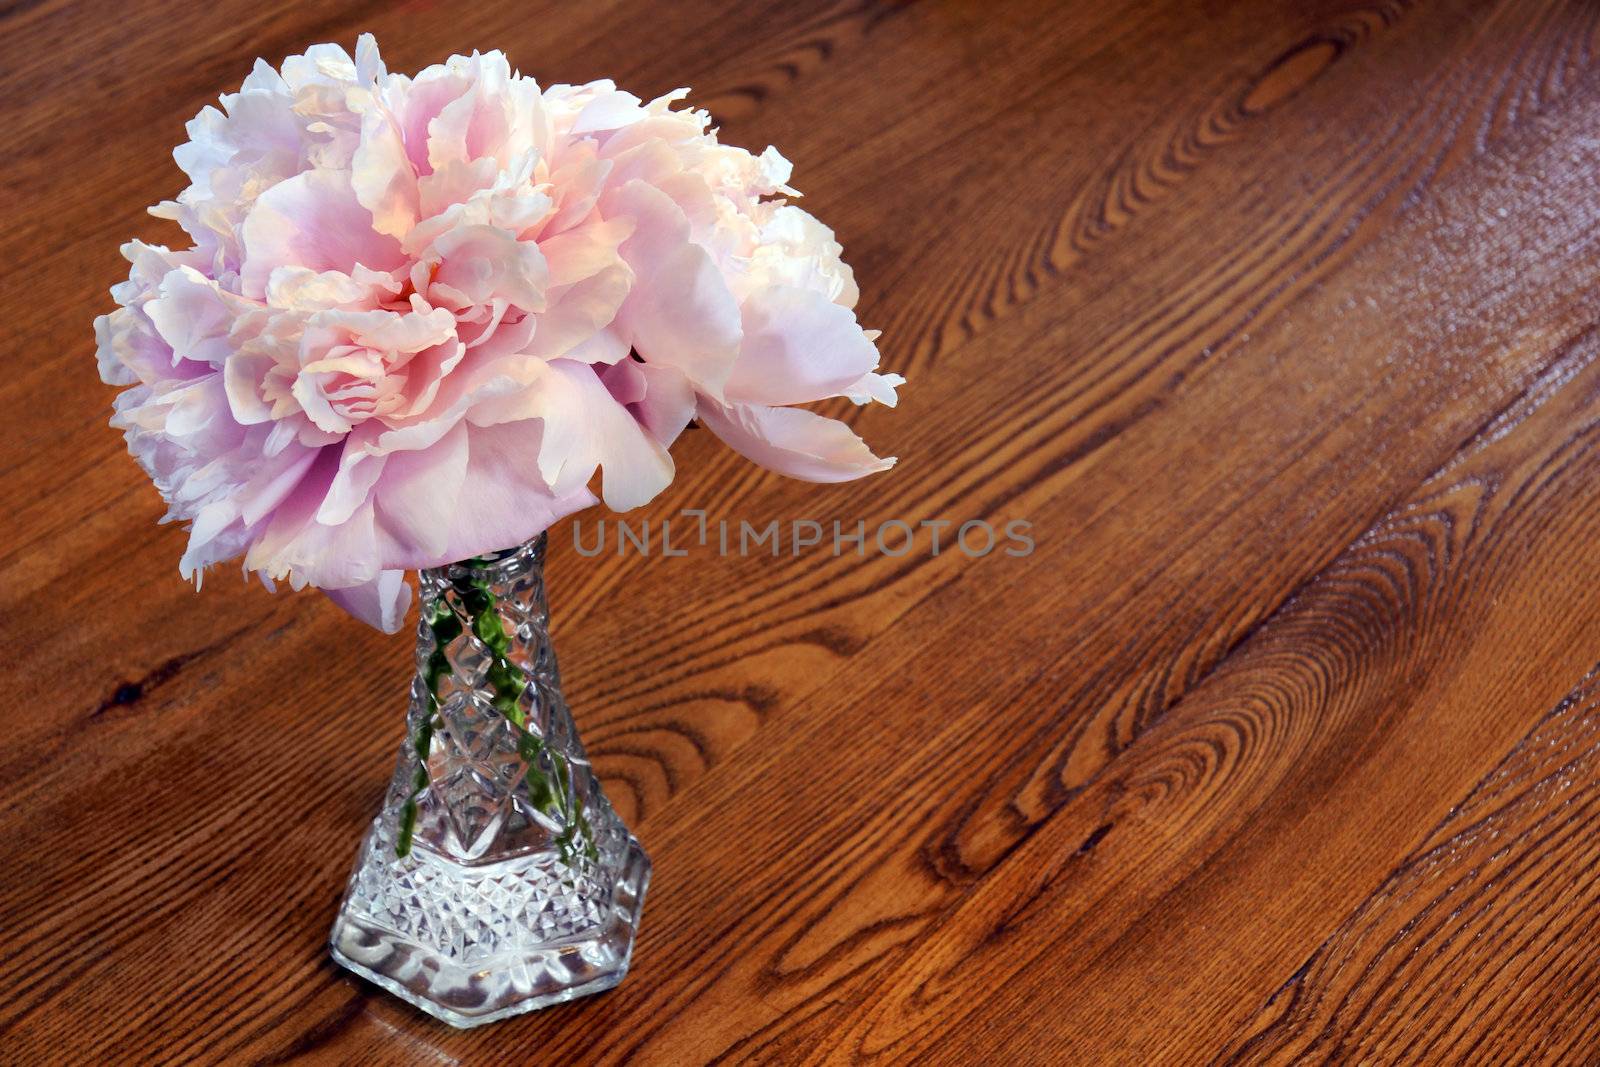 Pink peony flowers inside a cristal vase on a wooden table with veins and knots.